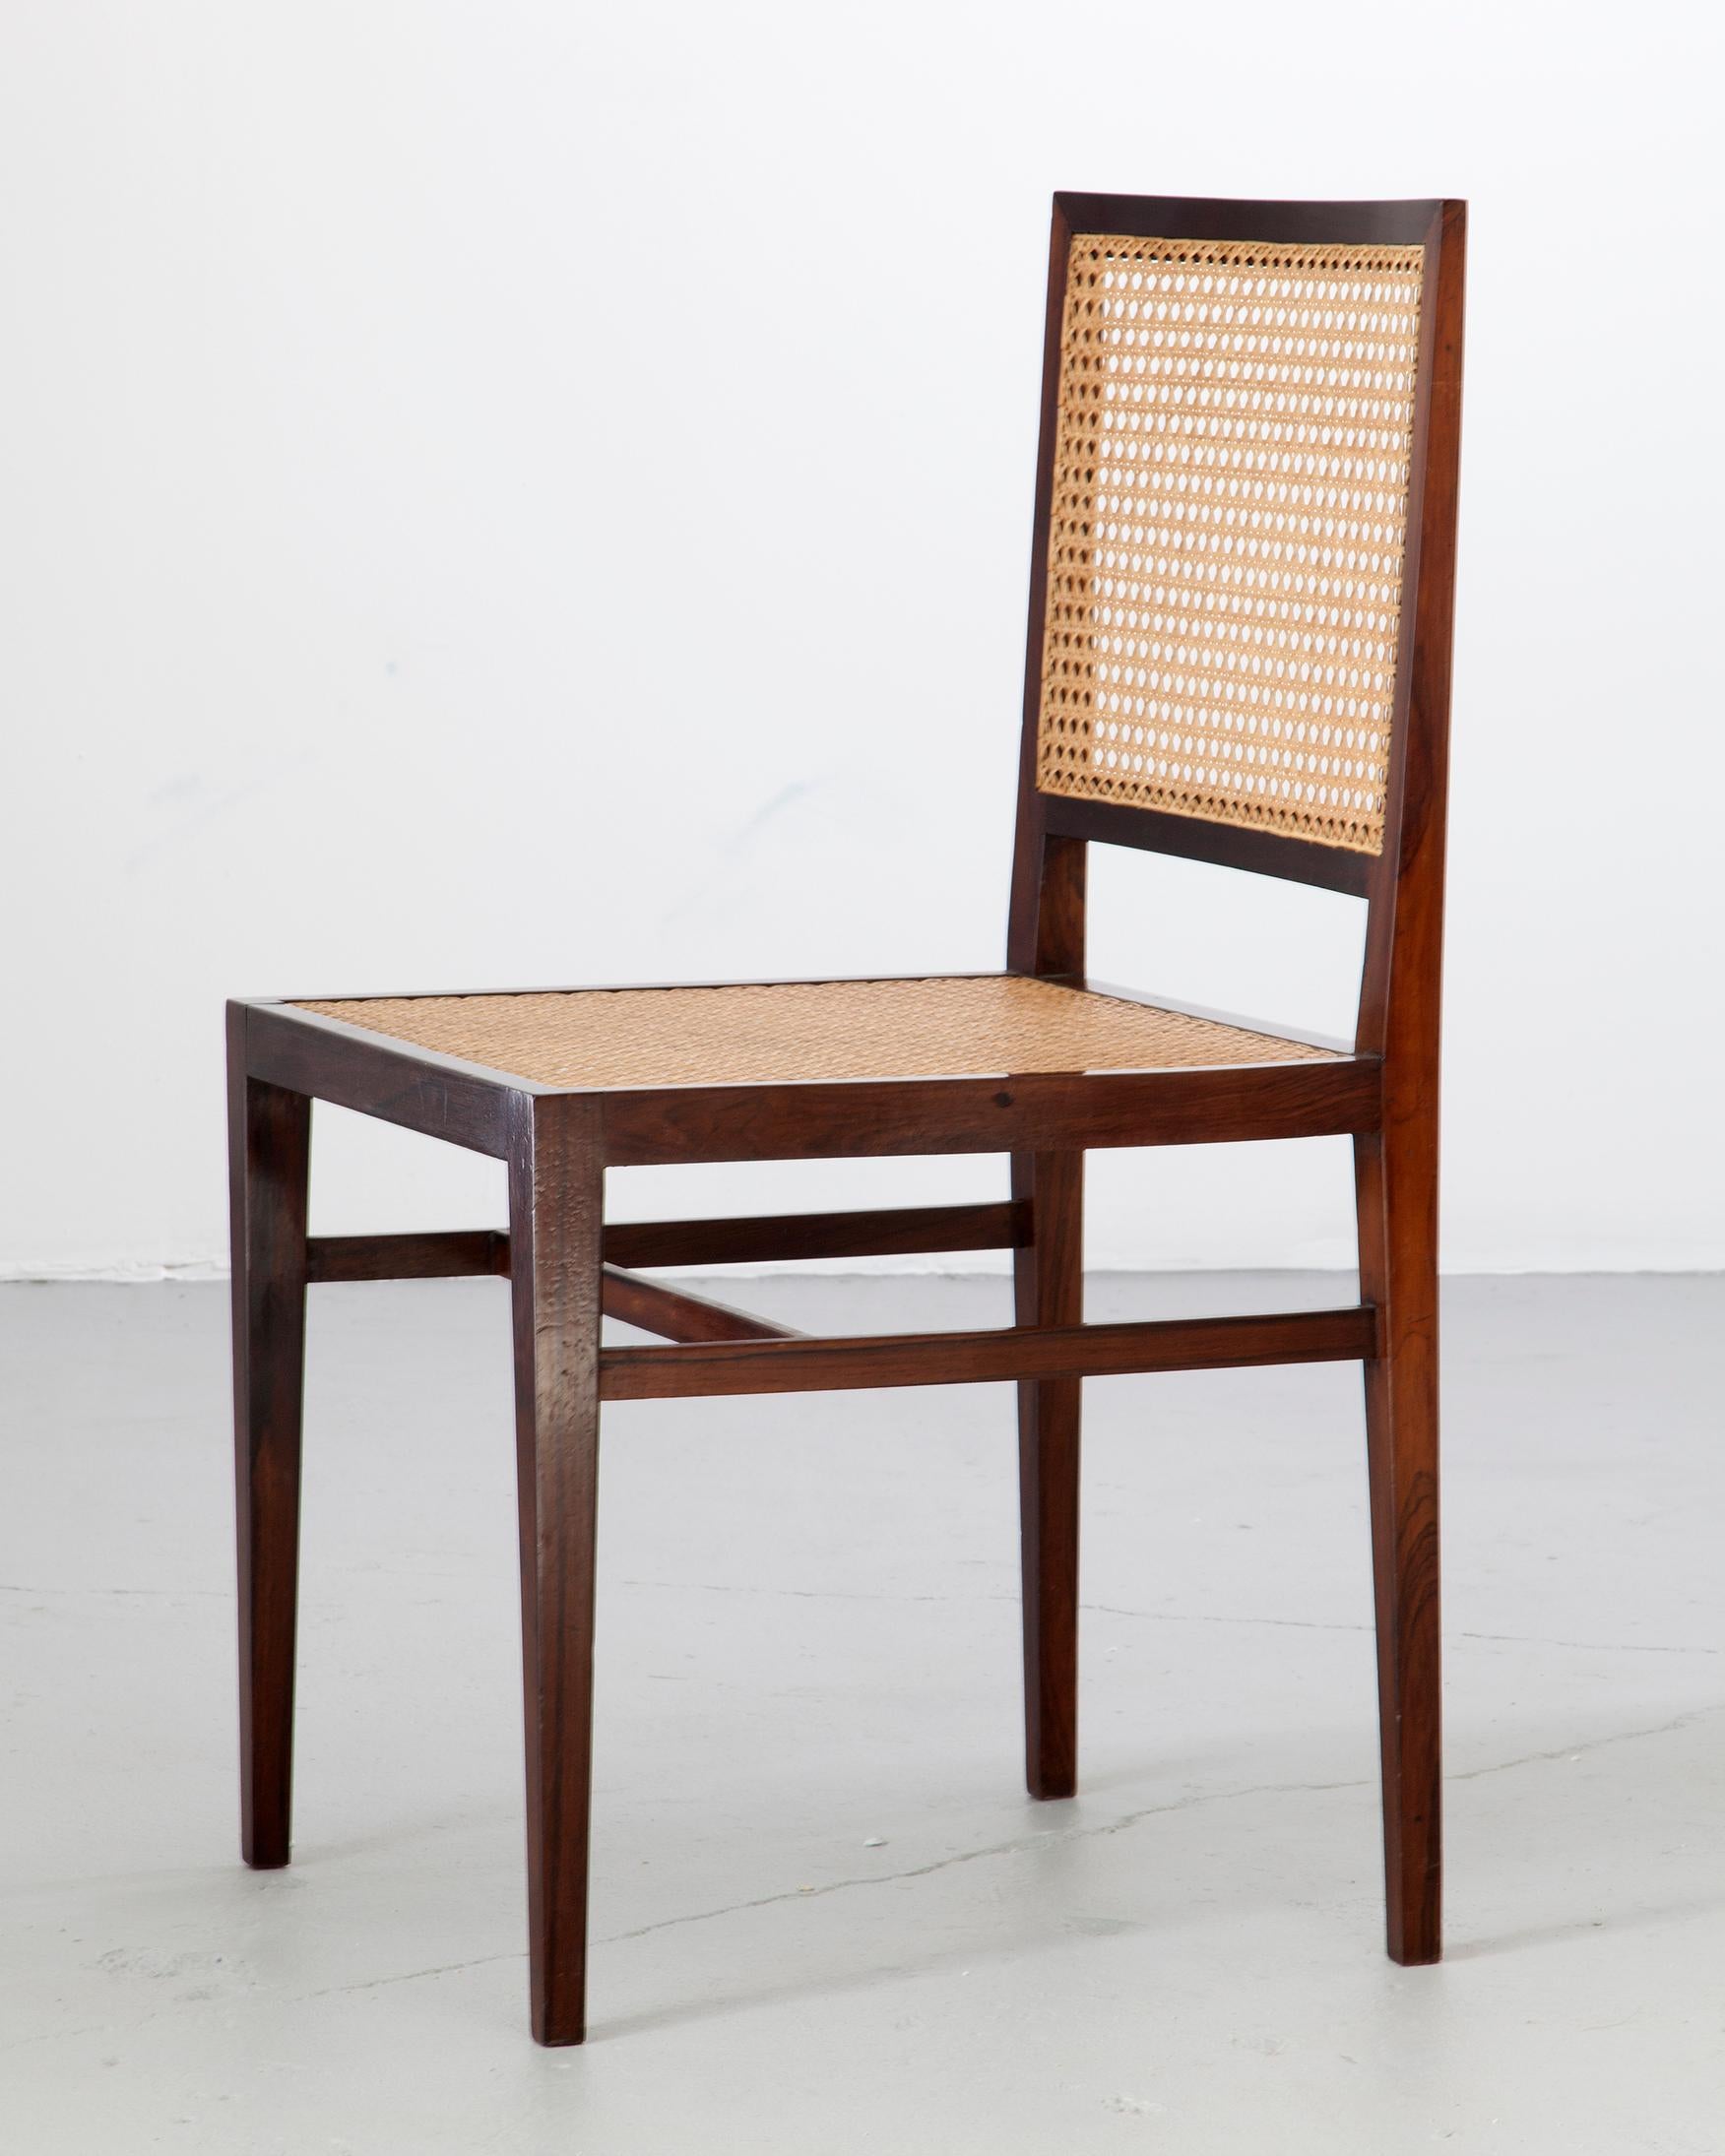 Modern Dining Chair in Rosewood and Cane by Branco & Preto, 1950s For Sale